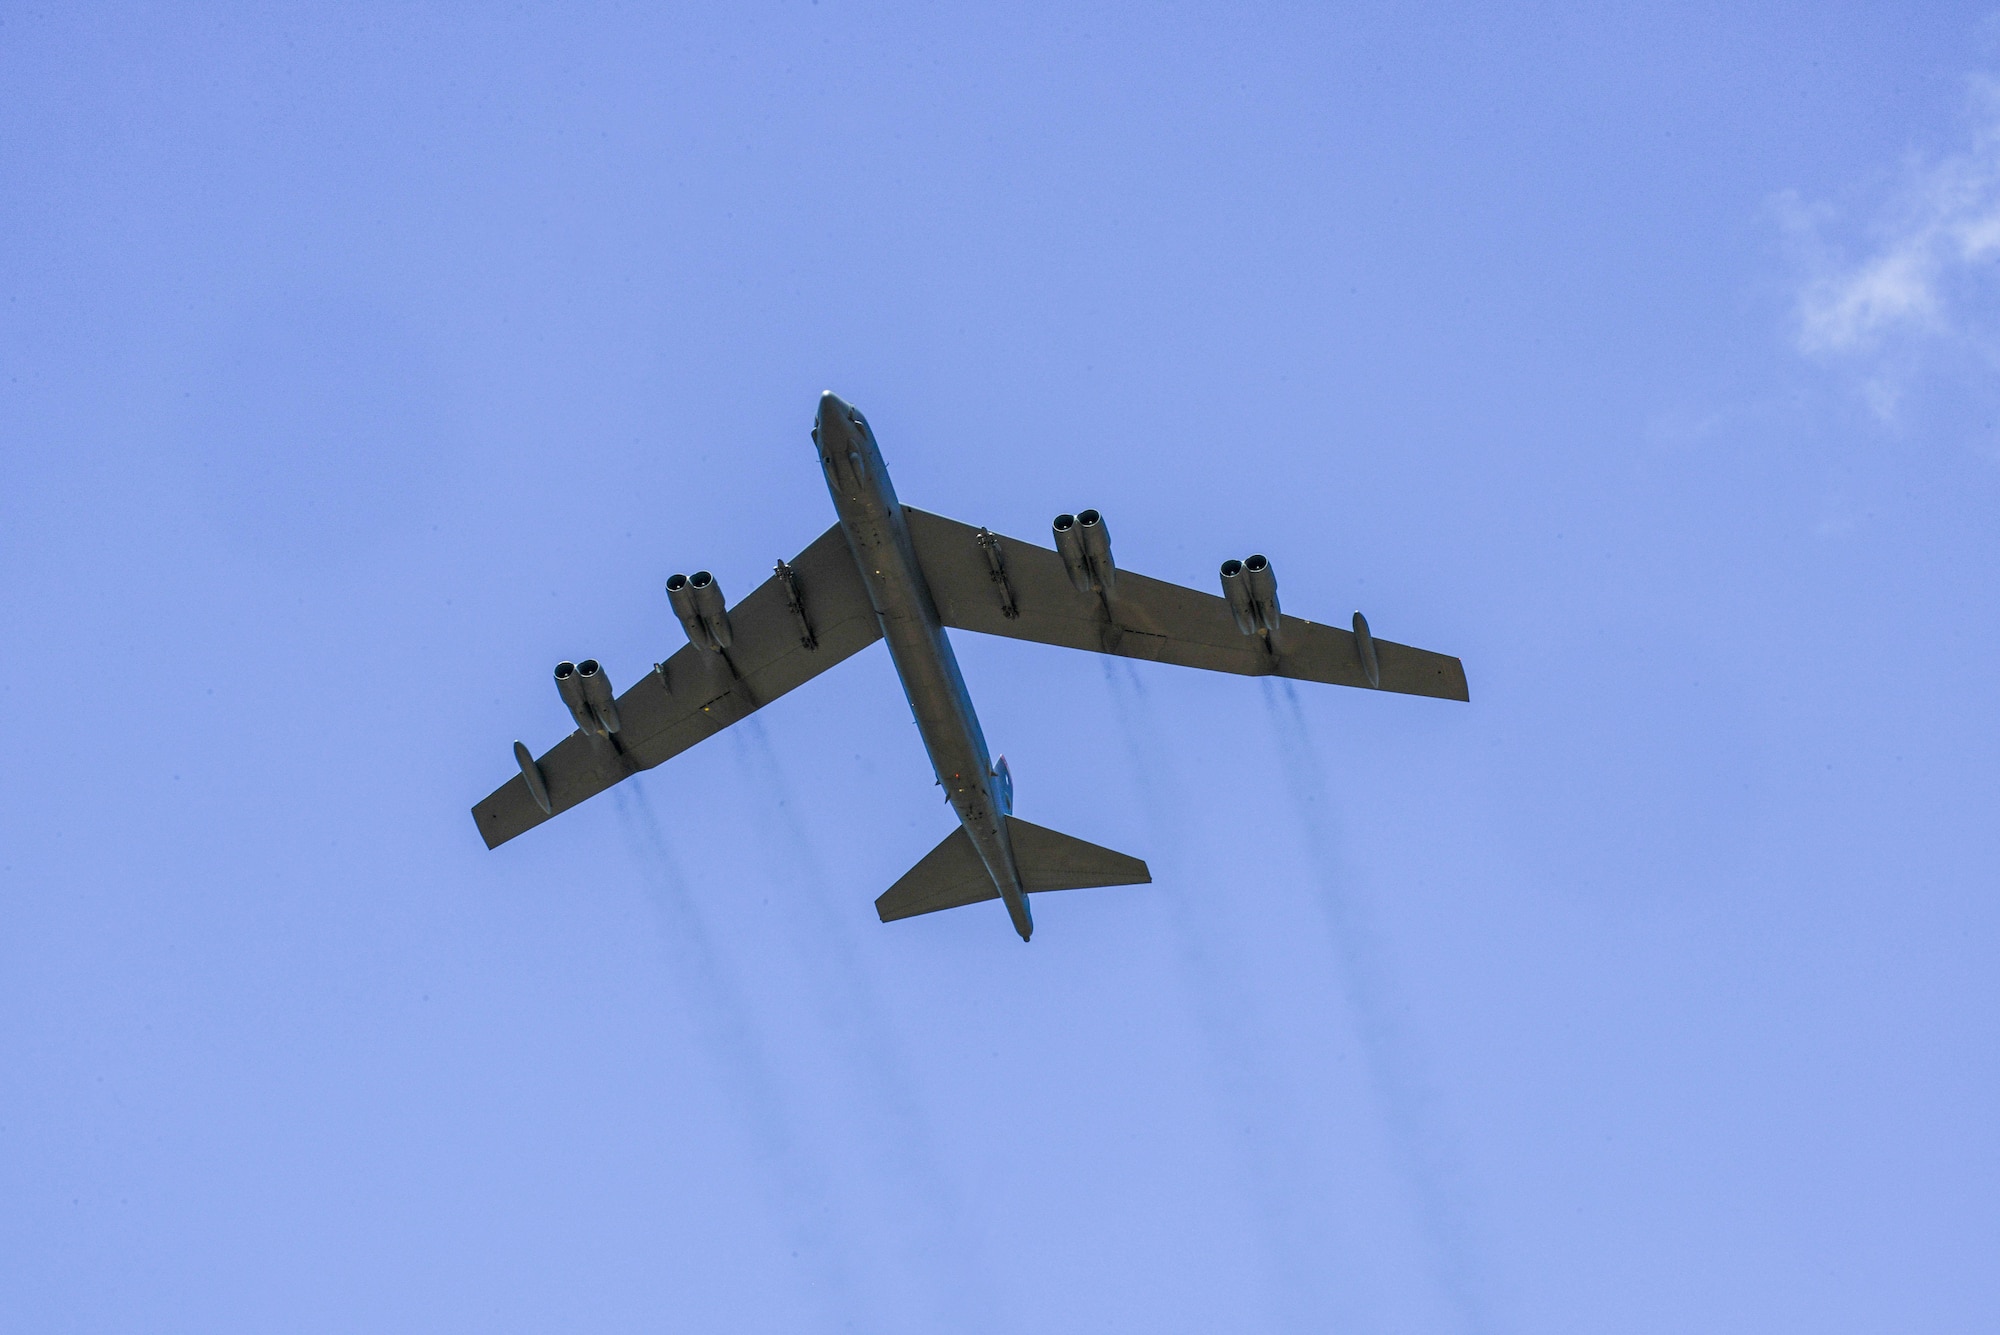 A U.S. Air Force B-52 Stratofortress flies over Adazi Military Training Base, Latvia, June 13, 2016.  U.S. forces and NATO partners are in Europe participating in Saber Strike 16; a long-standing, U.S. Joint Chiefs of Staff-directed, U.S. Army Europe-led cooperative-training exercise, which has been conducted annually since 2010.  Our presence in Europe and the relationships built over the past 70 years provide the U.S. strategic access critical to meet our NATO commitment to respond to threats against our allies and partners. (U.S. Air Force photo/Senior Airman Nicole Keim)